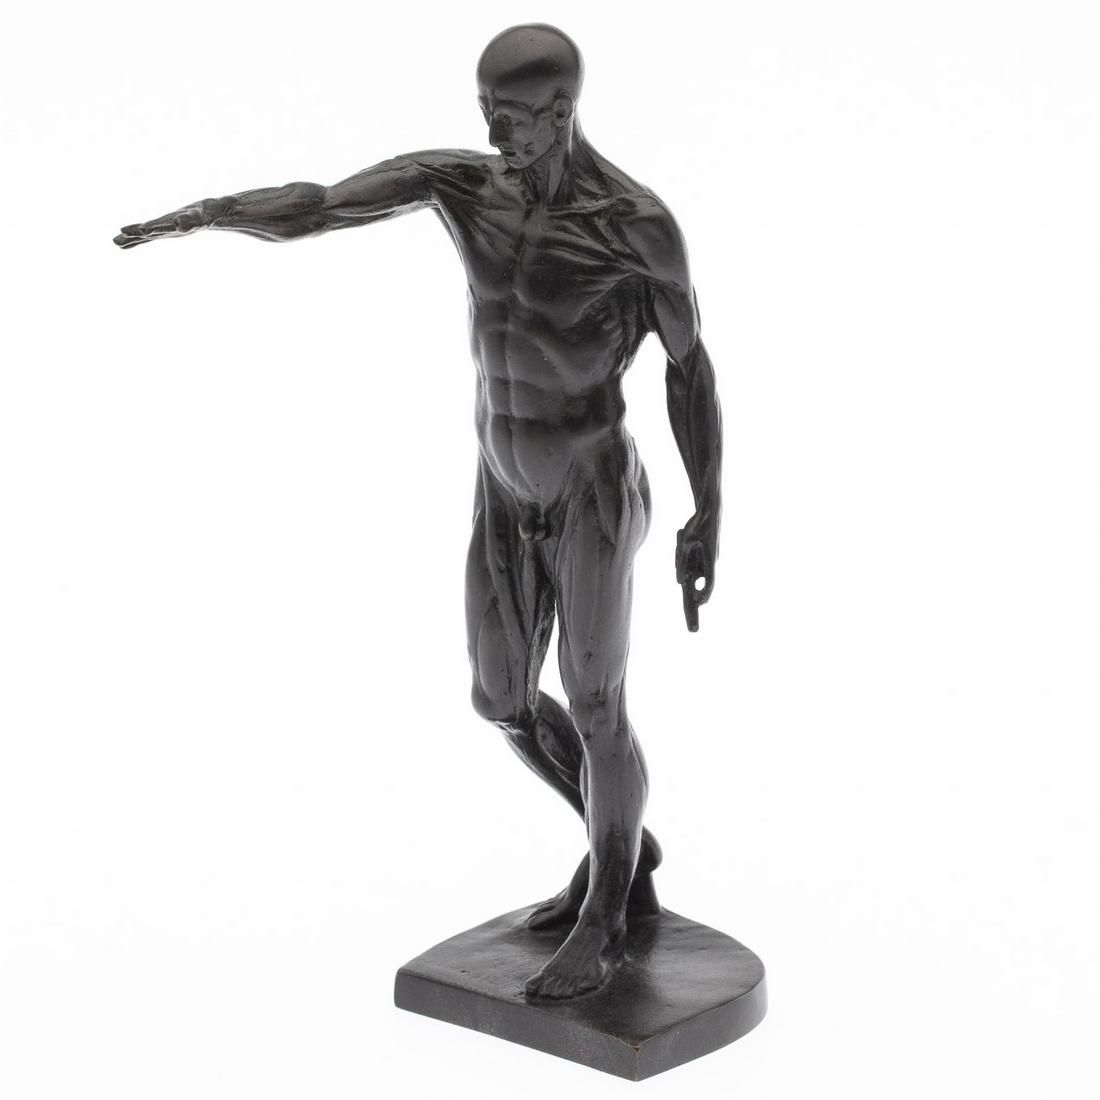 ANATOMICAL BRONZE OF A STANDING 3d32c9